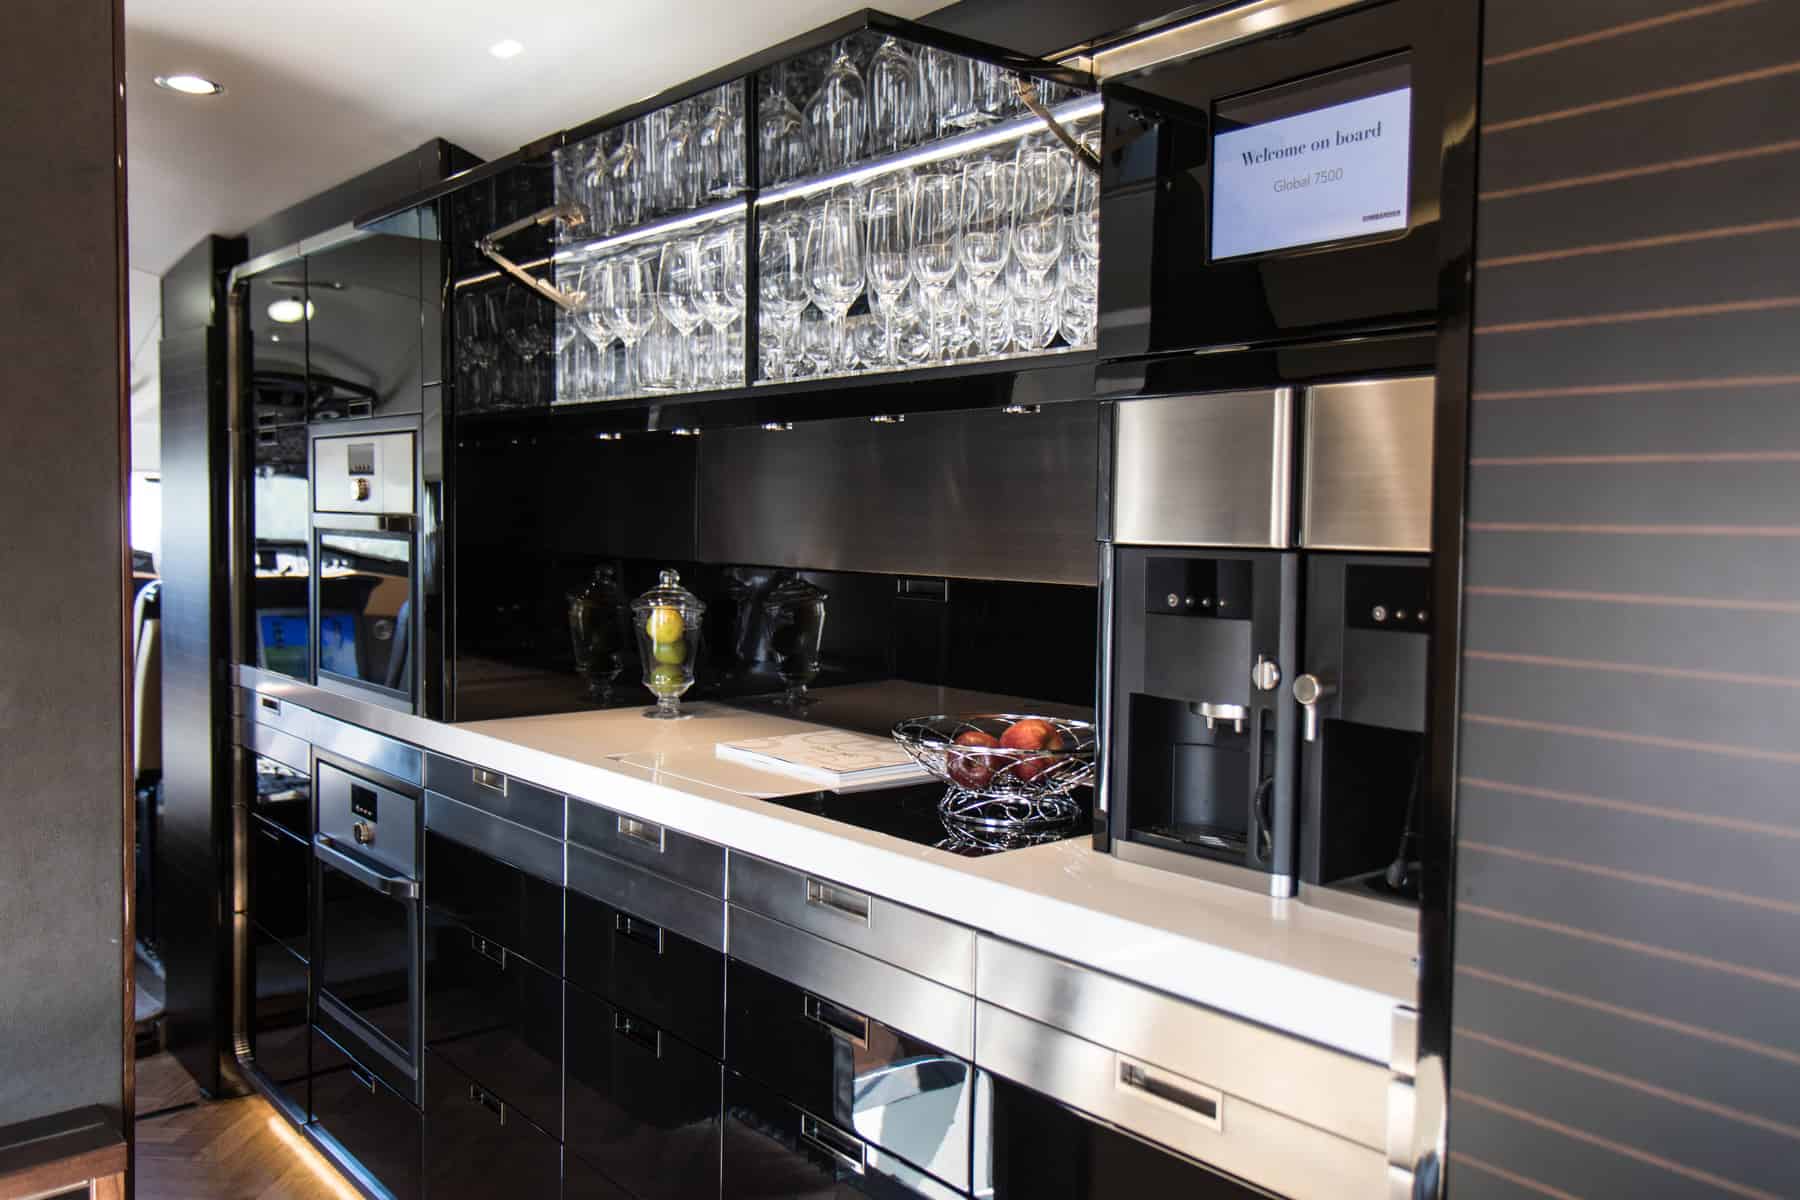 PICTURE OF GLOBAL 7500 KITCHEN